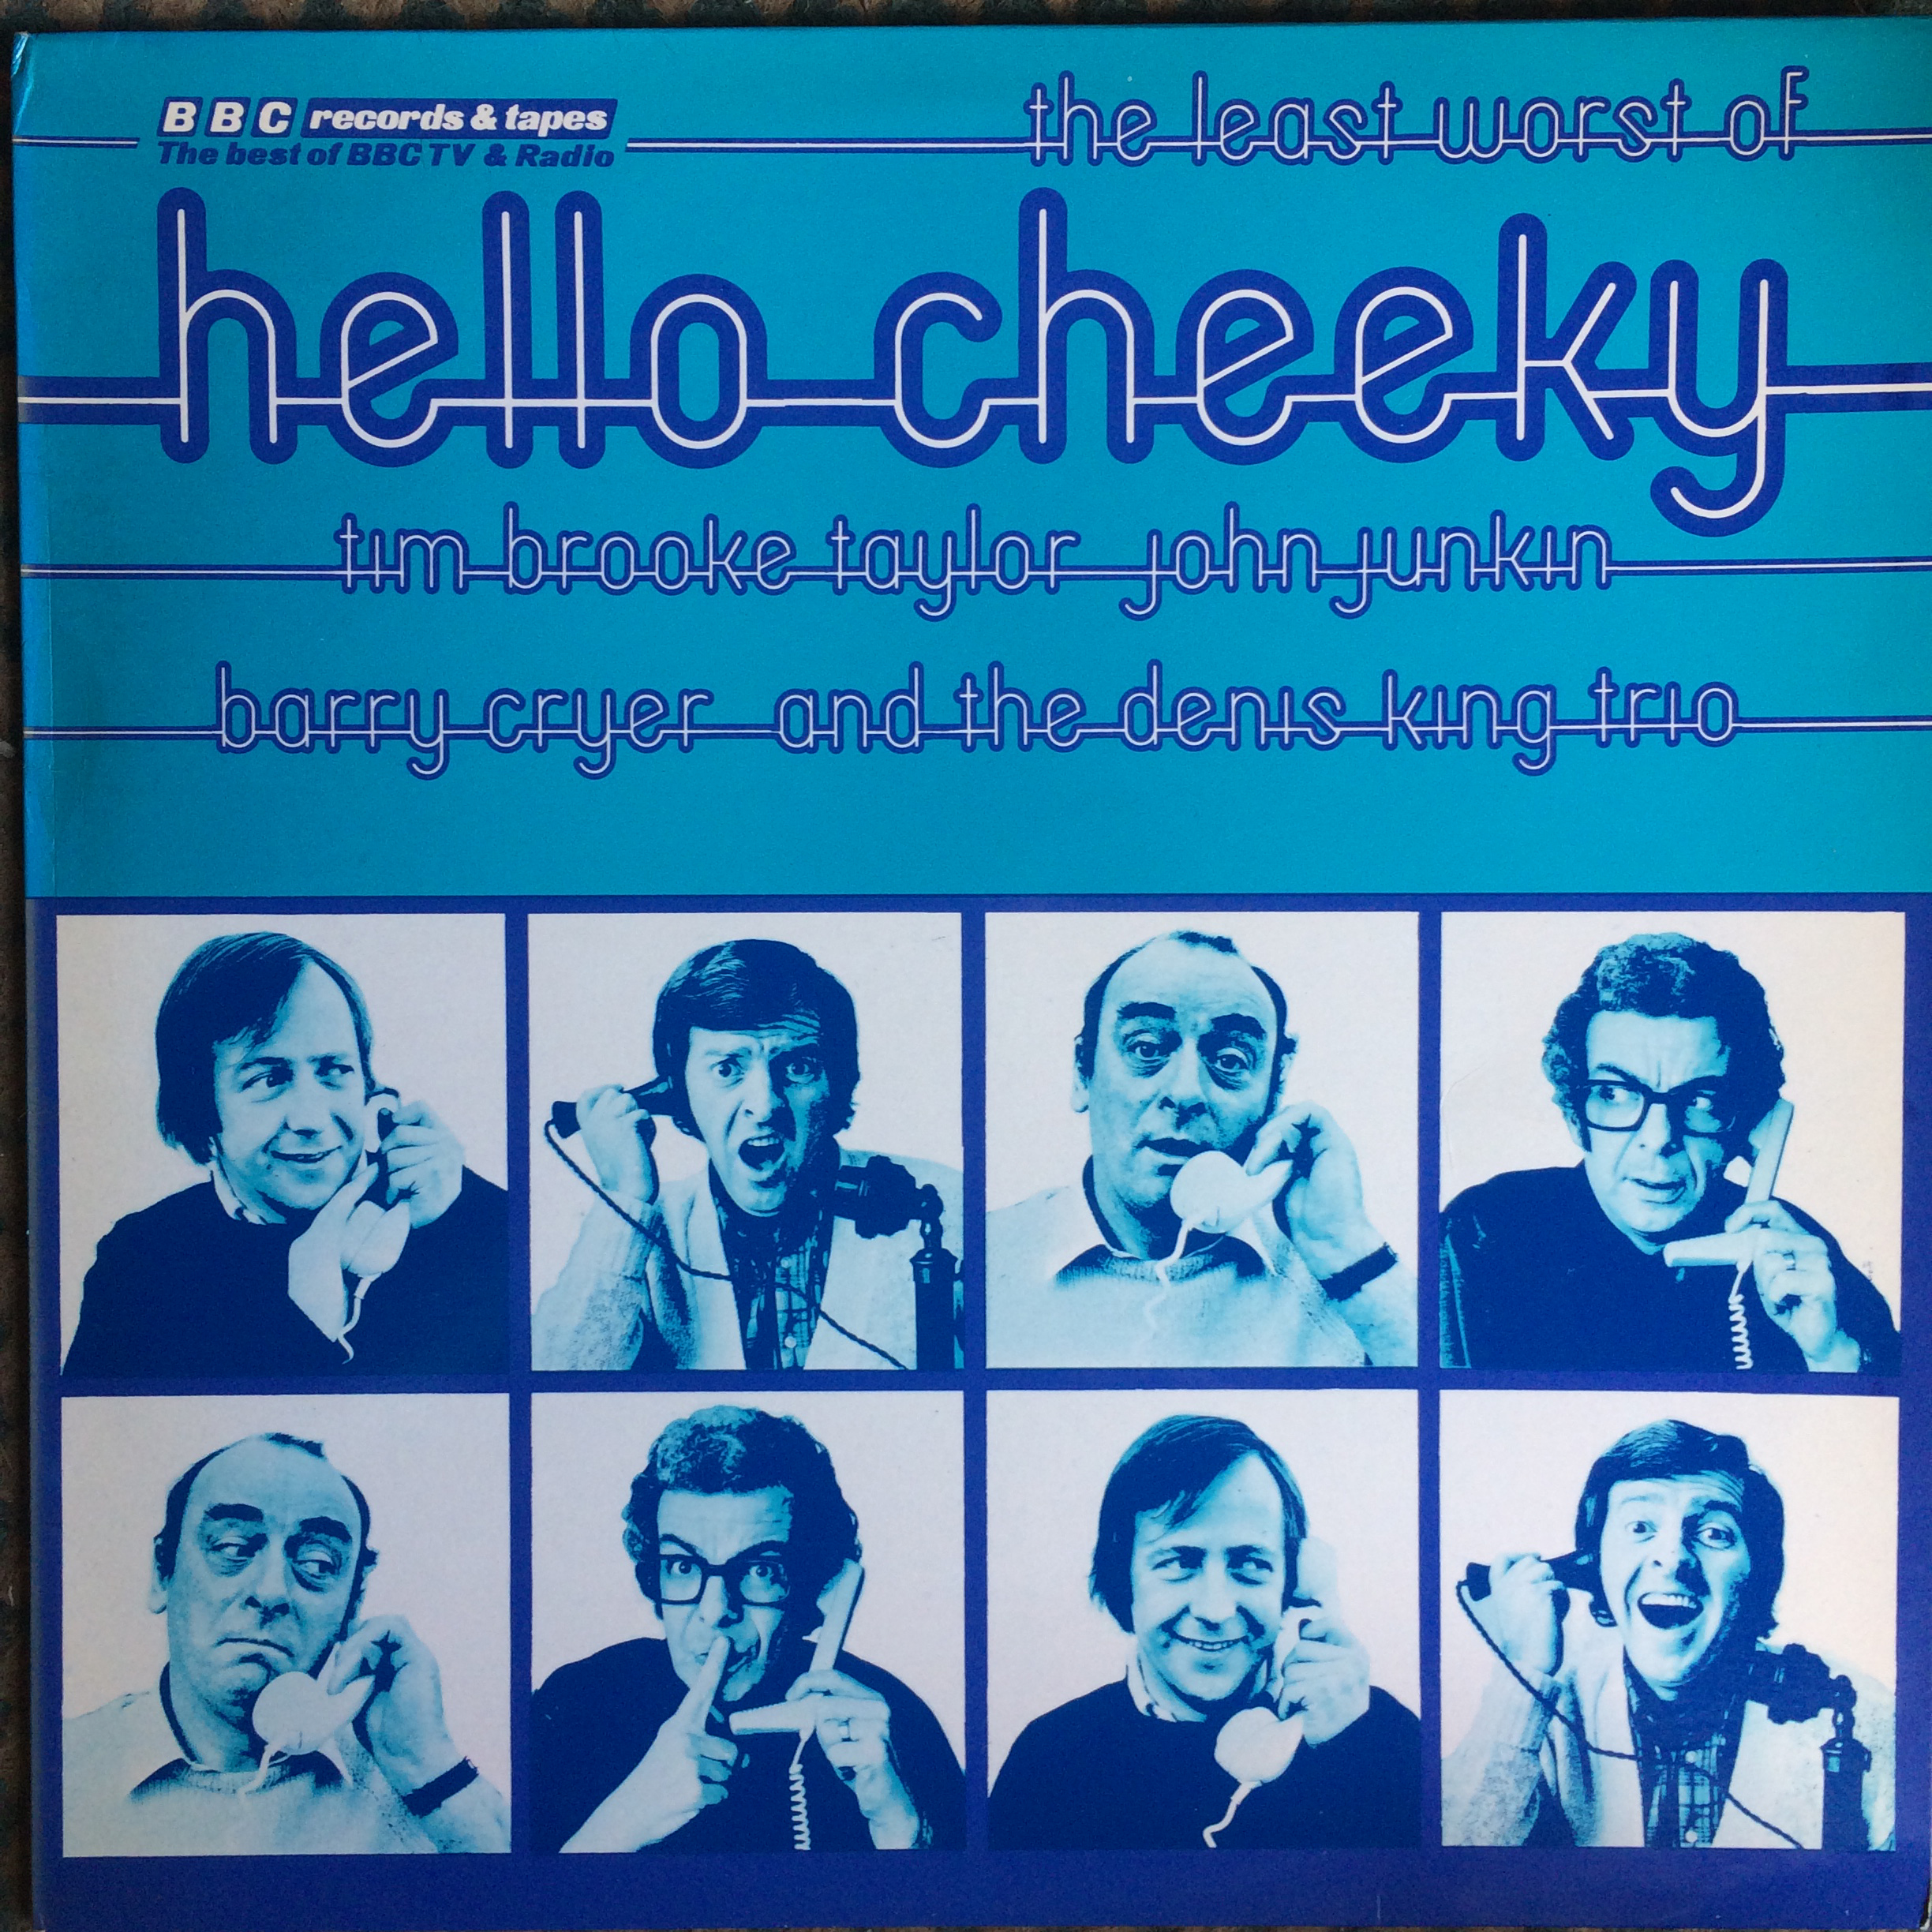 REH 189 The Least Worst of… Hello Cheeky